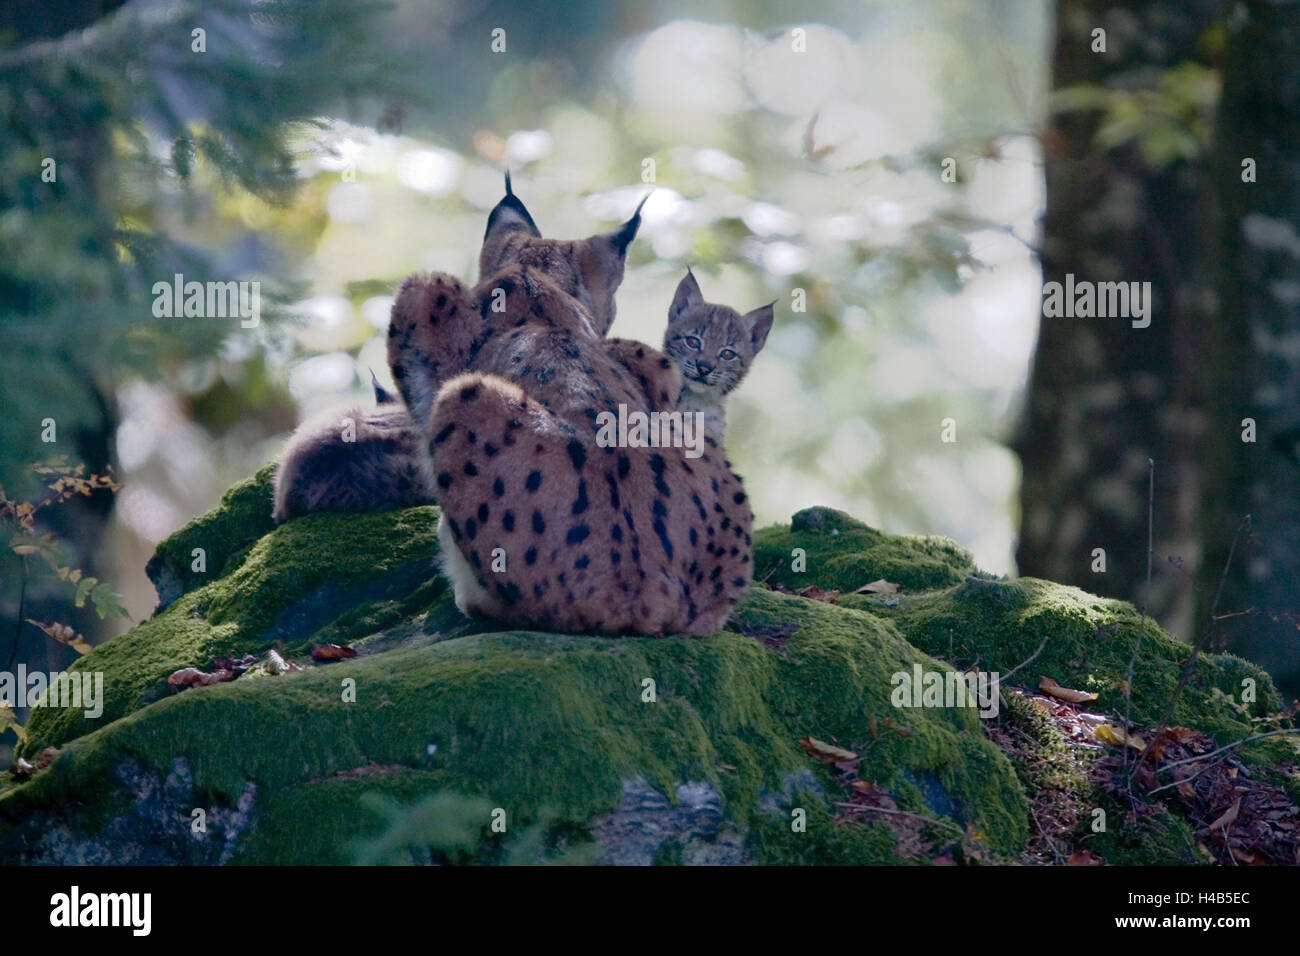 Forest, Eurasian lynx, Lynx lynx, mother animal, watchfulness, young animals, back view, Stock Photo